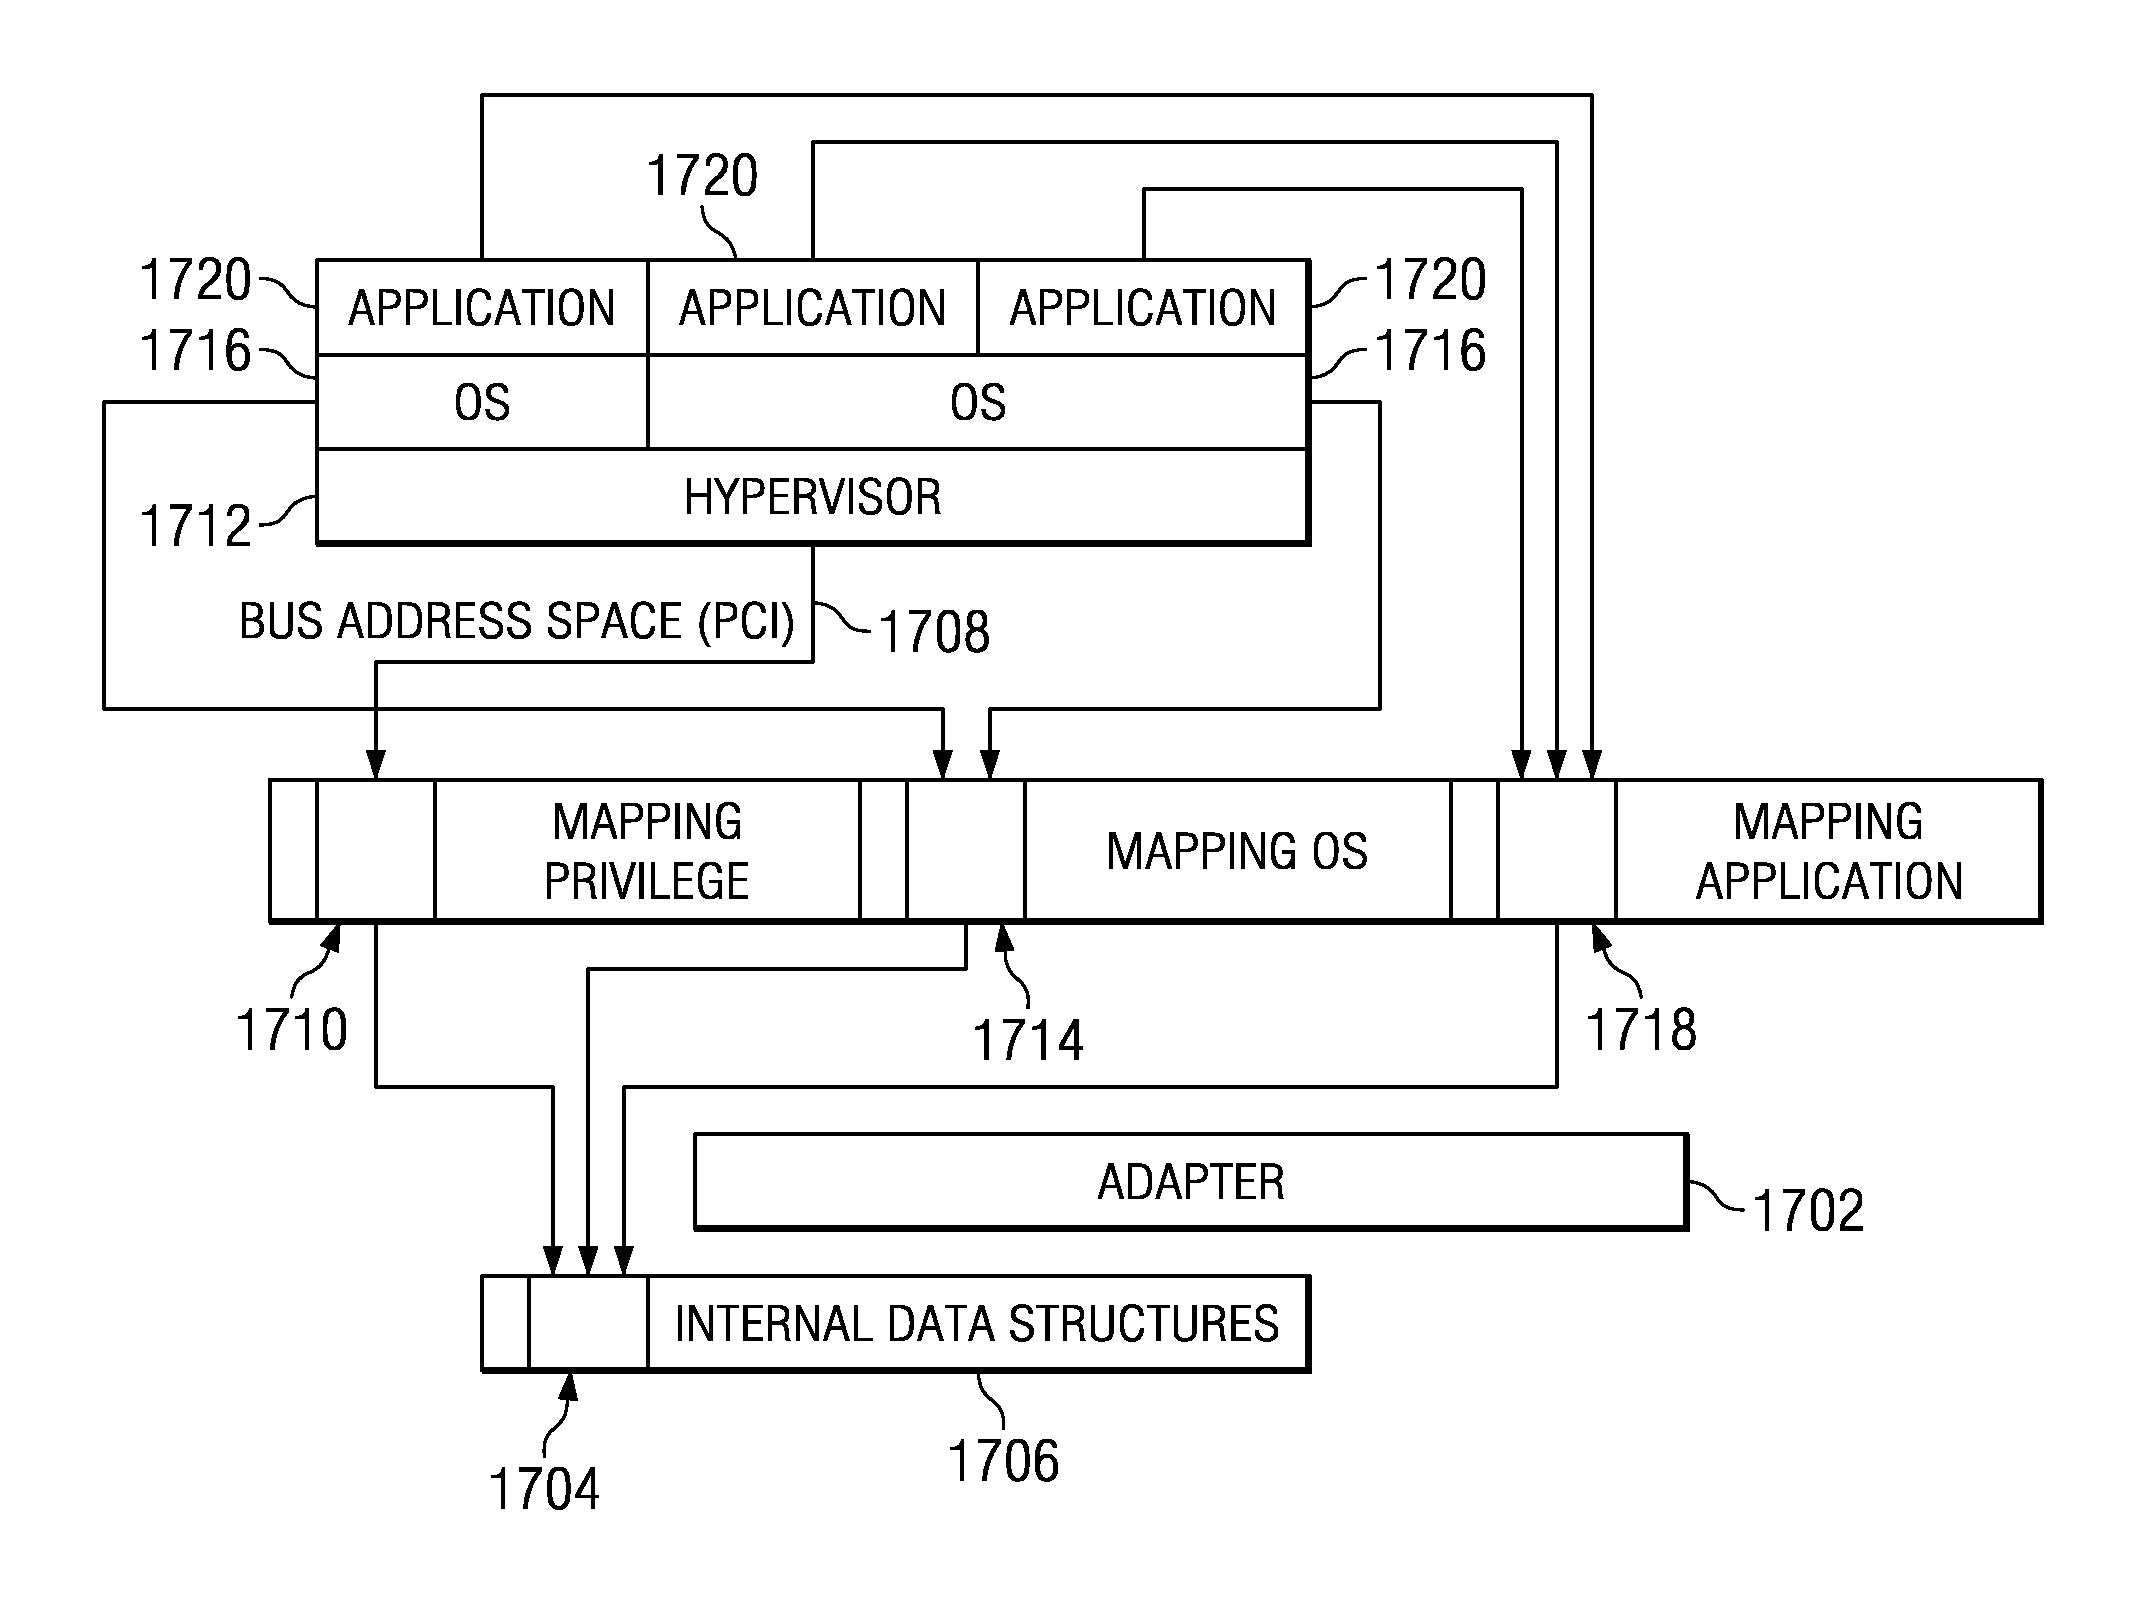 Association of memory access through protection attributes that are associated to an access control level on a PCI adapter that supports virtualization